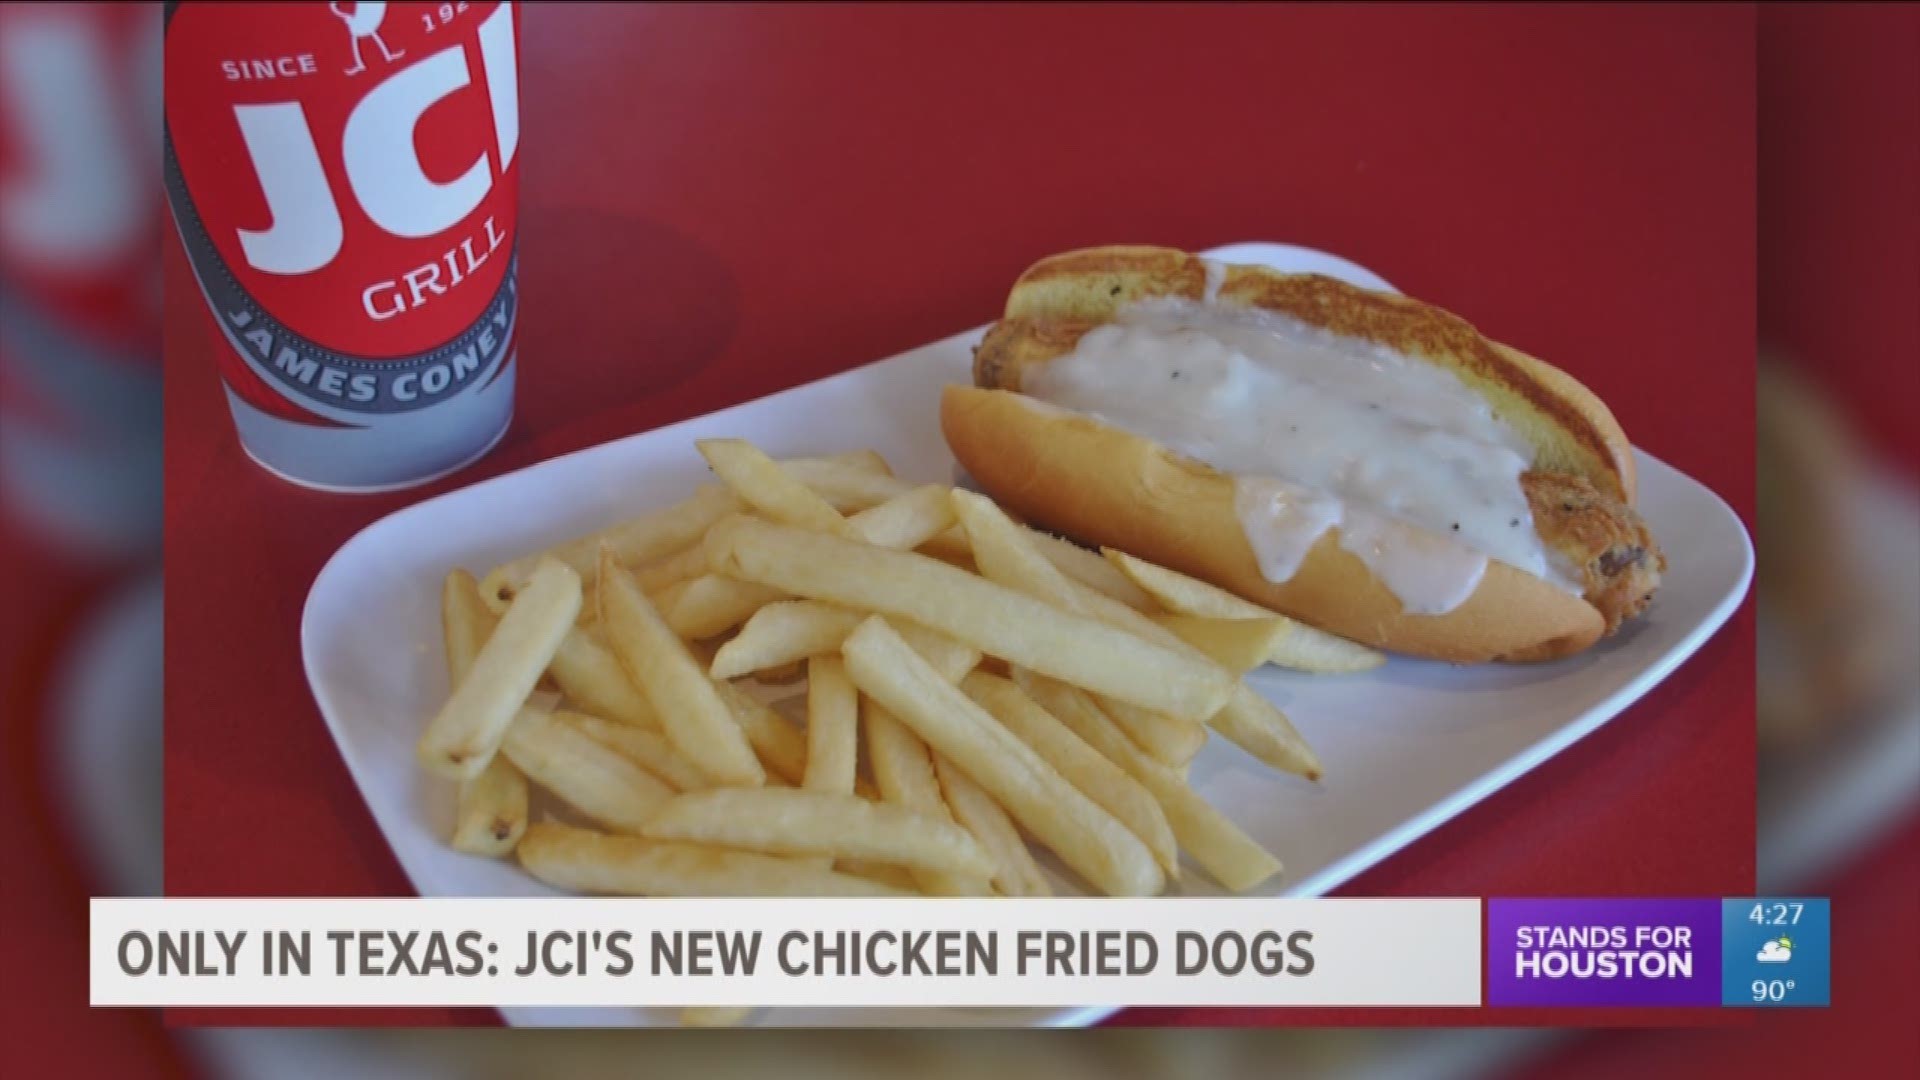 Would you try this? James Coney Island has created a new item! It's a Nolan Ryan all-beef dog, hand breaded, and quickly fried, giving it a chicken fried crust. It's then served in a toasted potato bun and drizzled with gravy. 